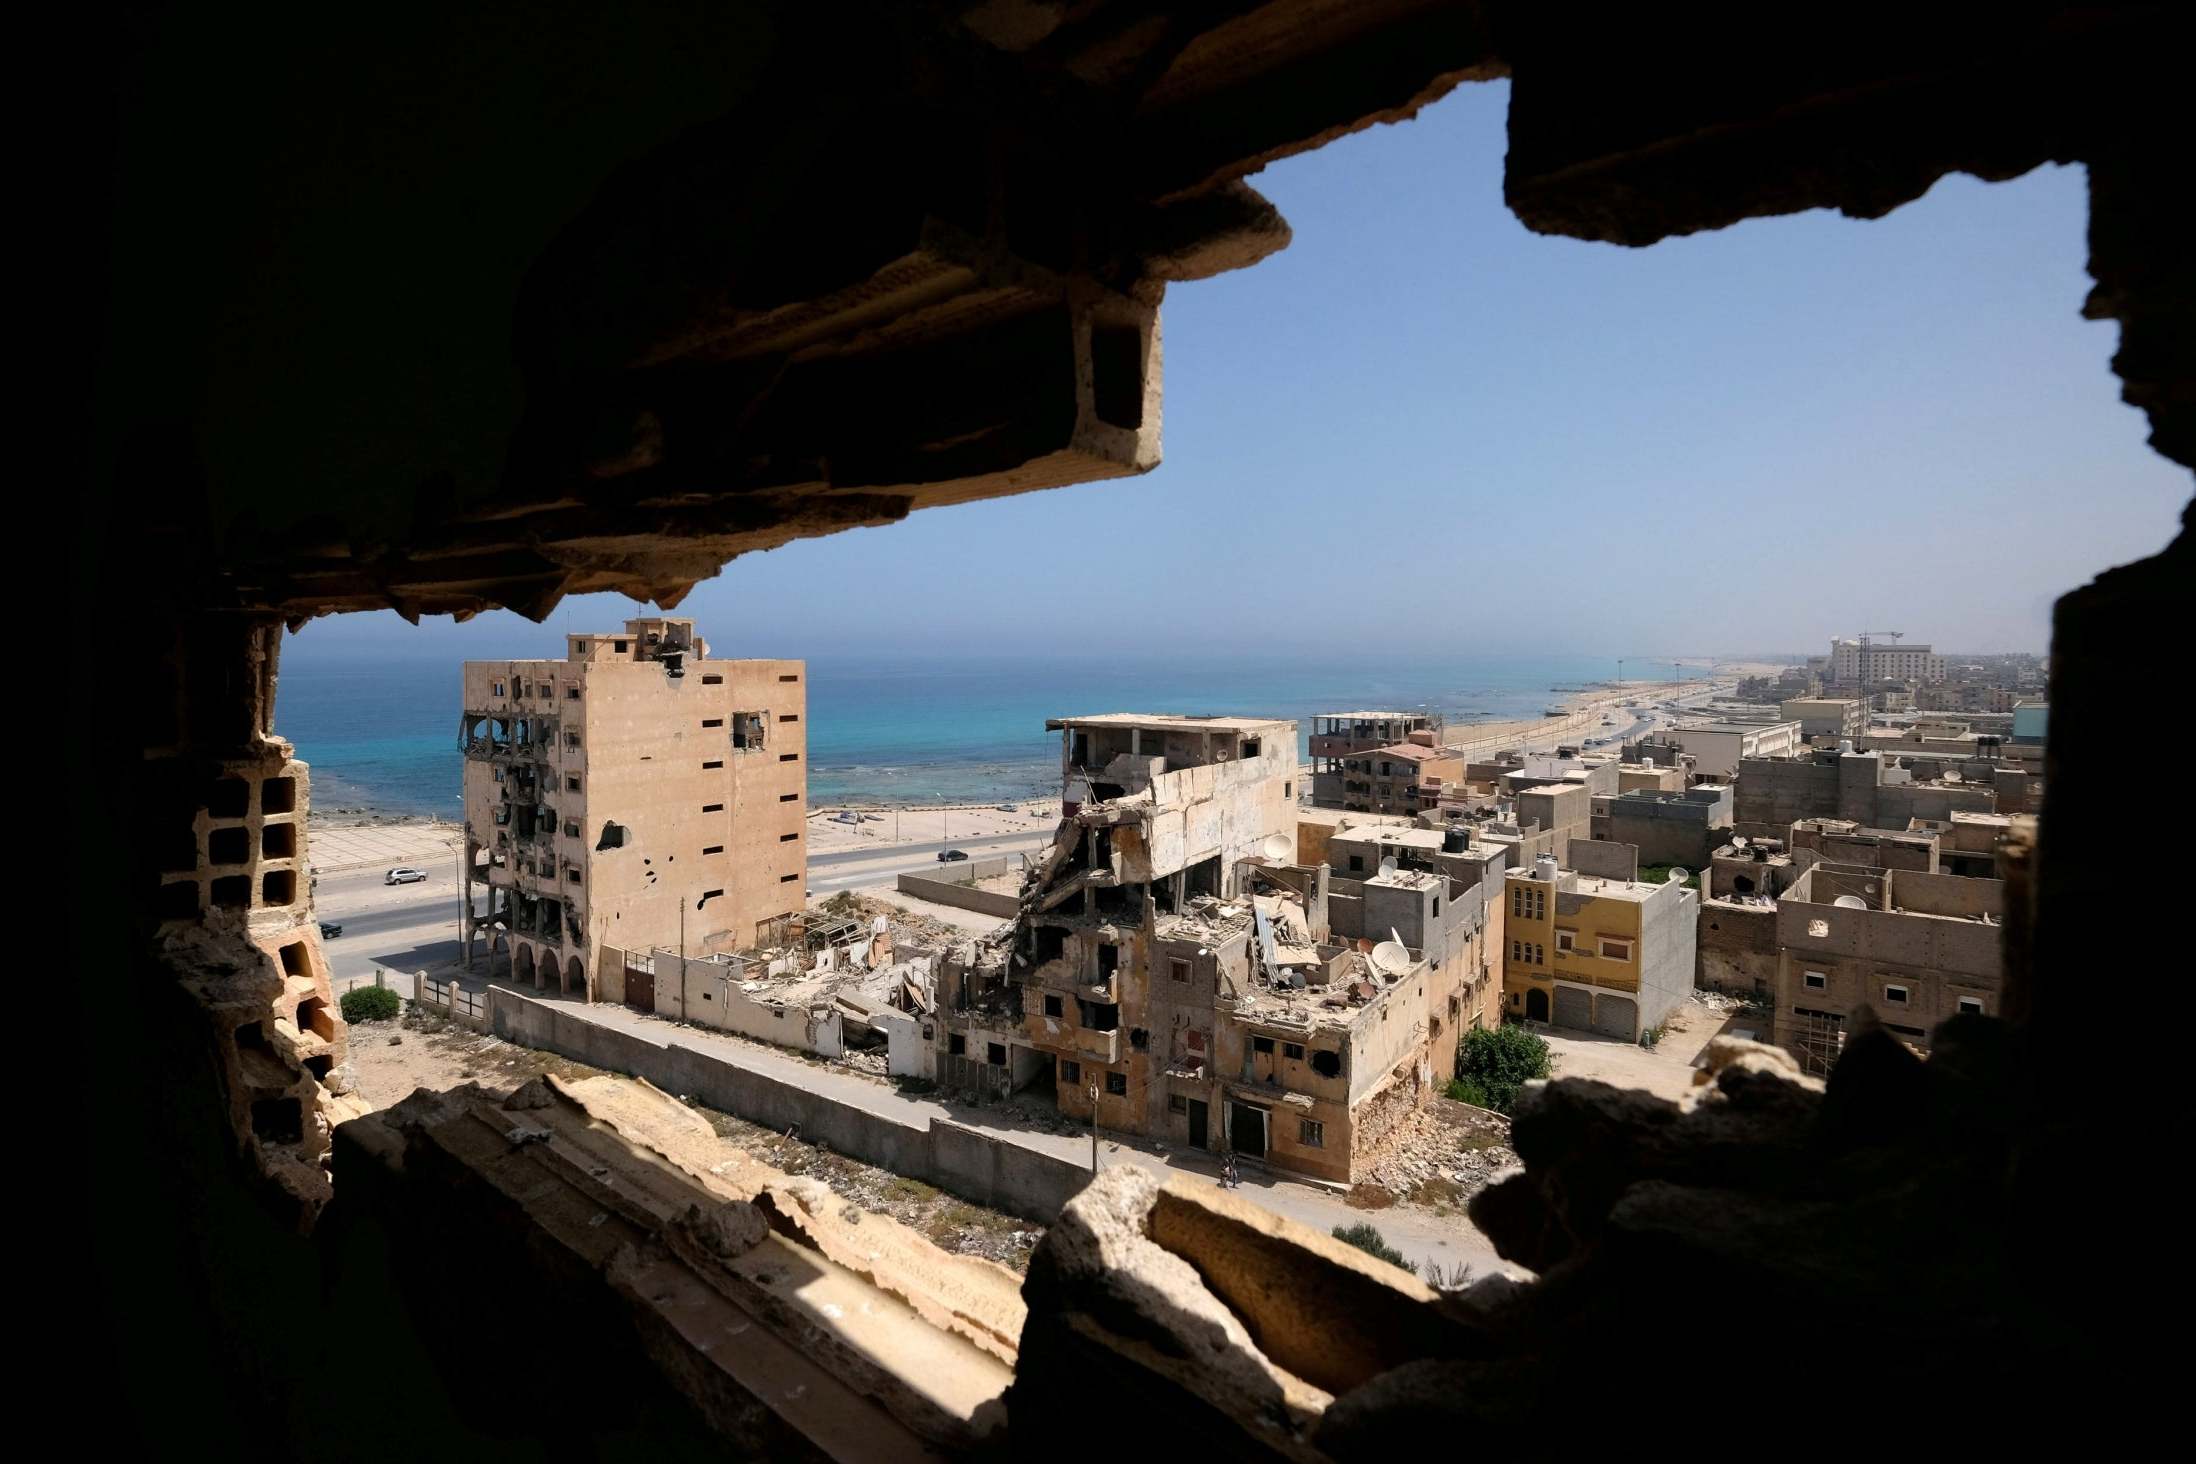 Progress is being made in Tripoli, Libya! By Africa Rebuilt. : BuildTheEarth